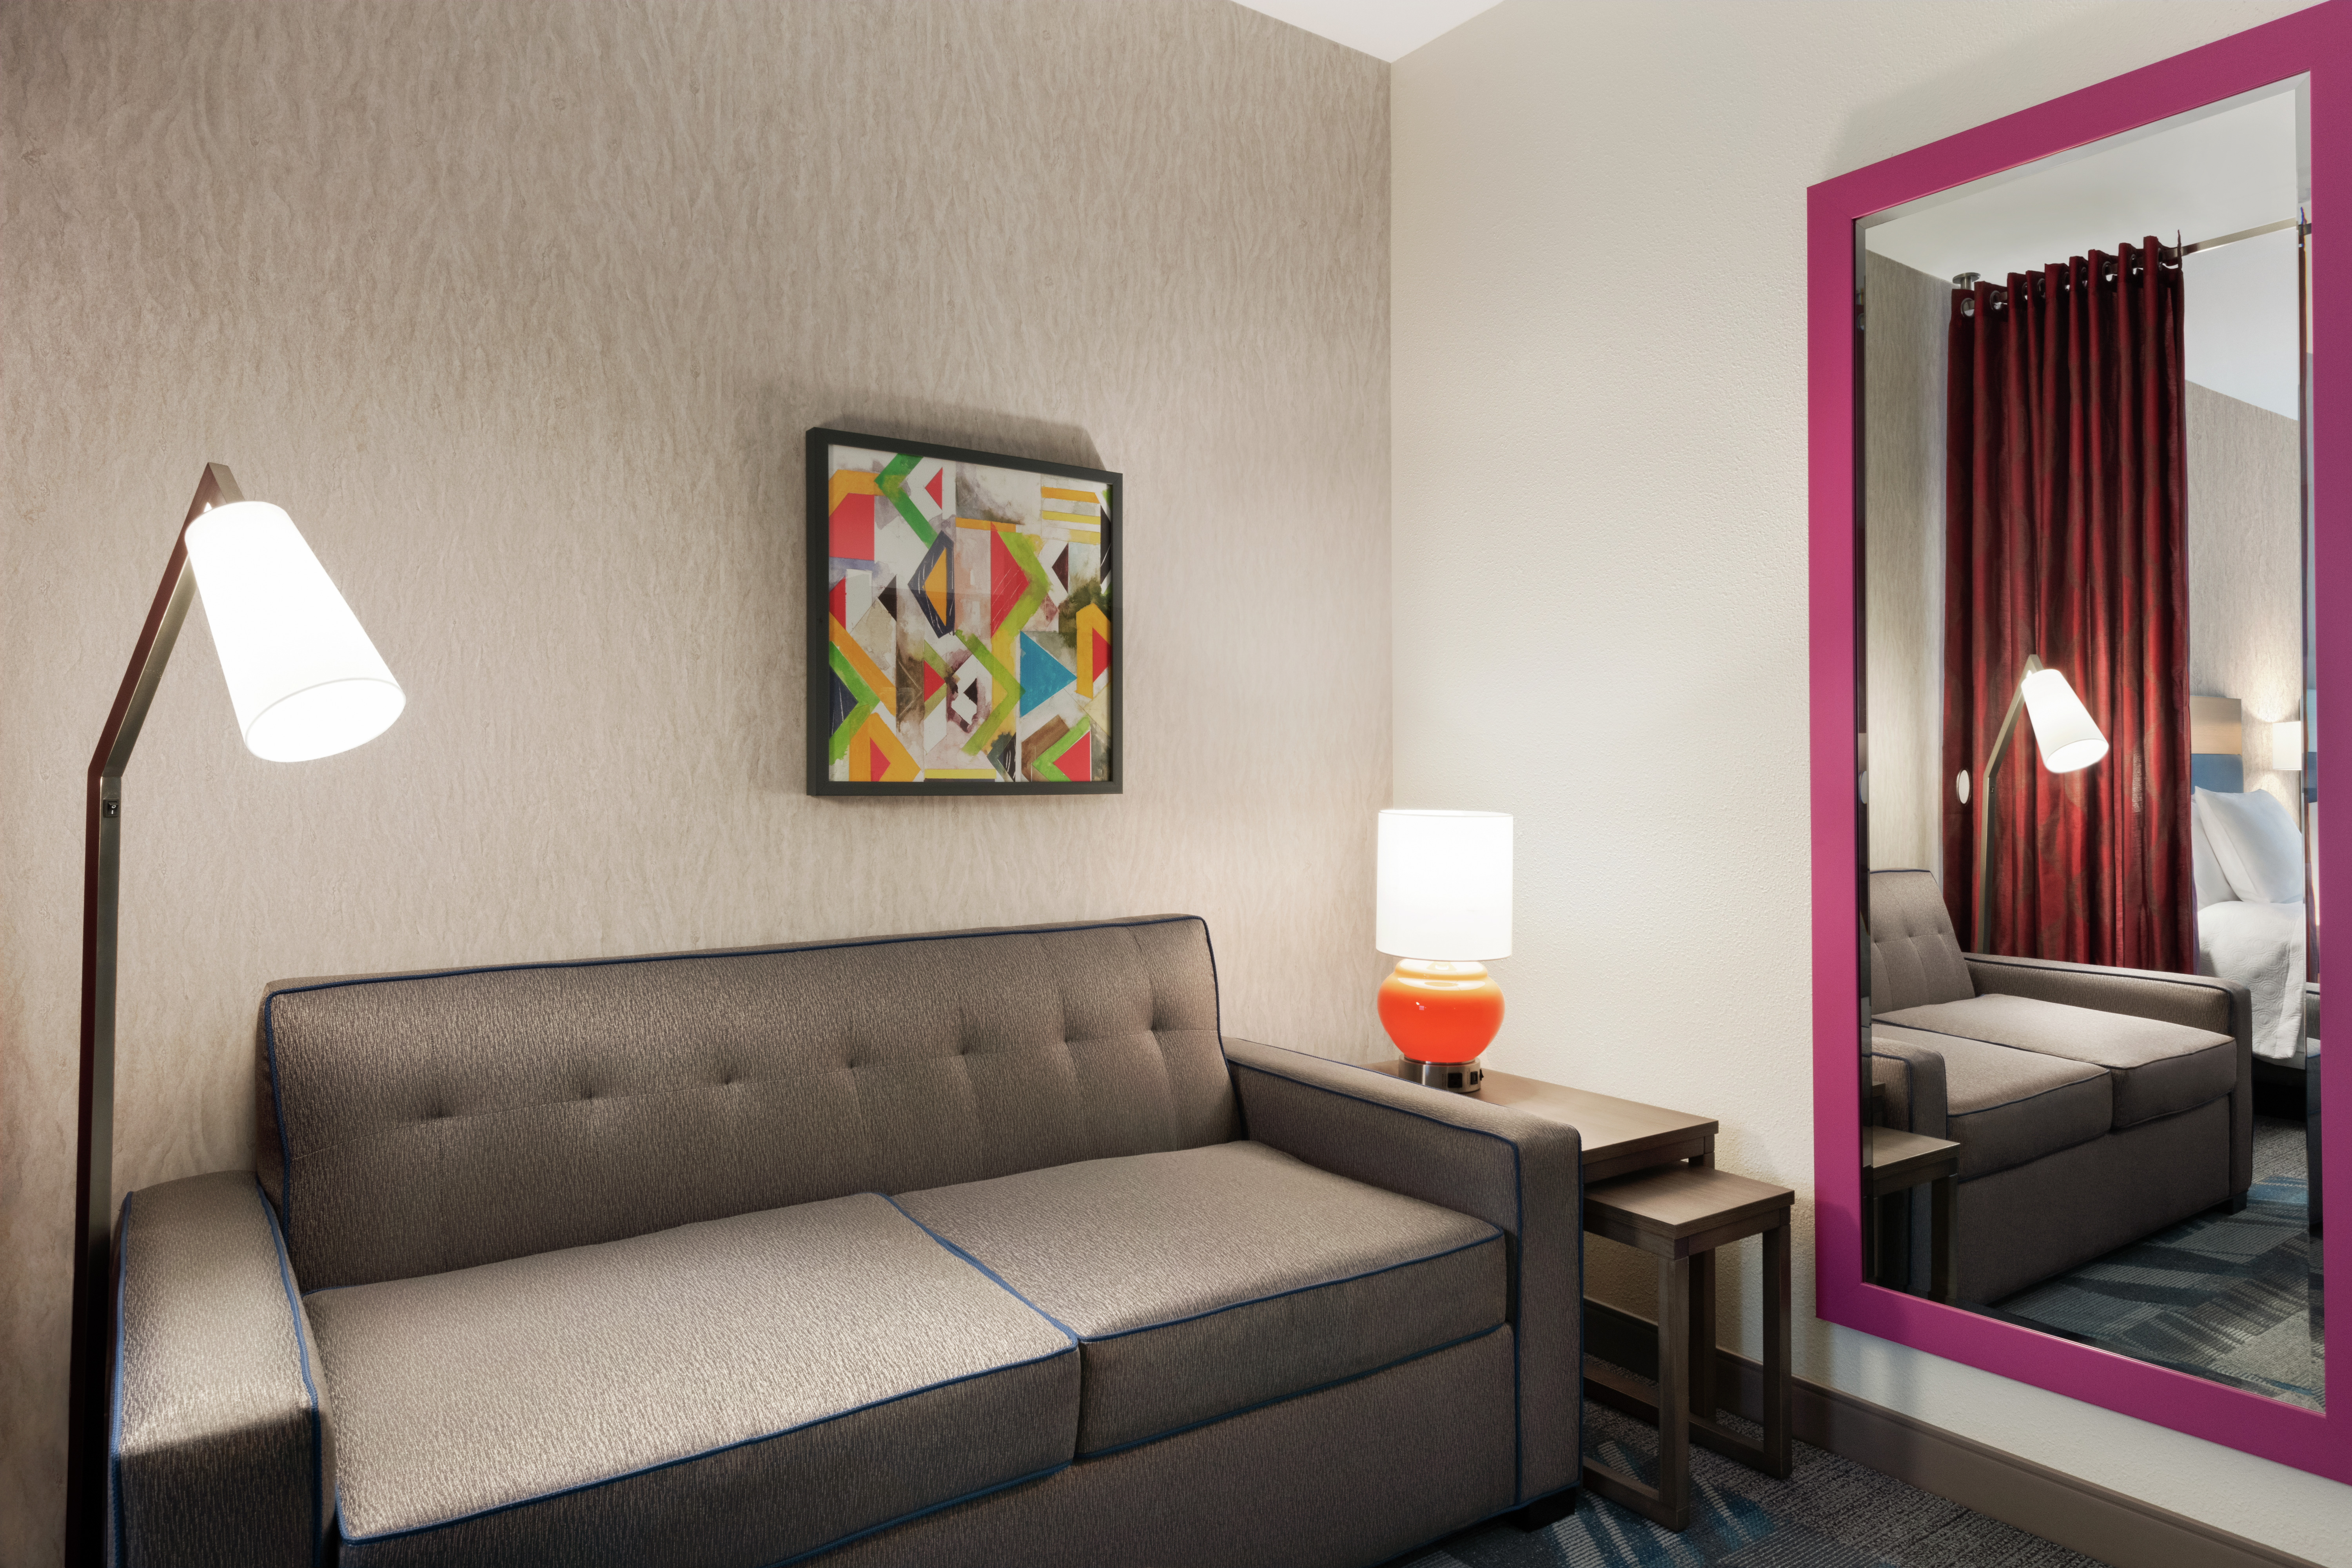 Studio suite lounge area with sofa, fully length mirror, and geometric framed art on wall.